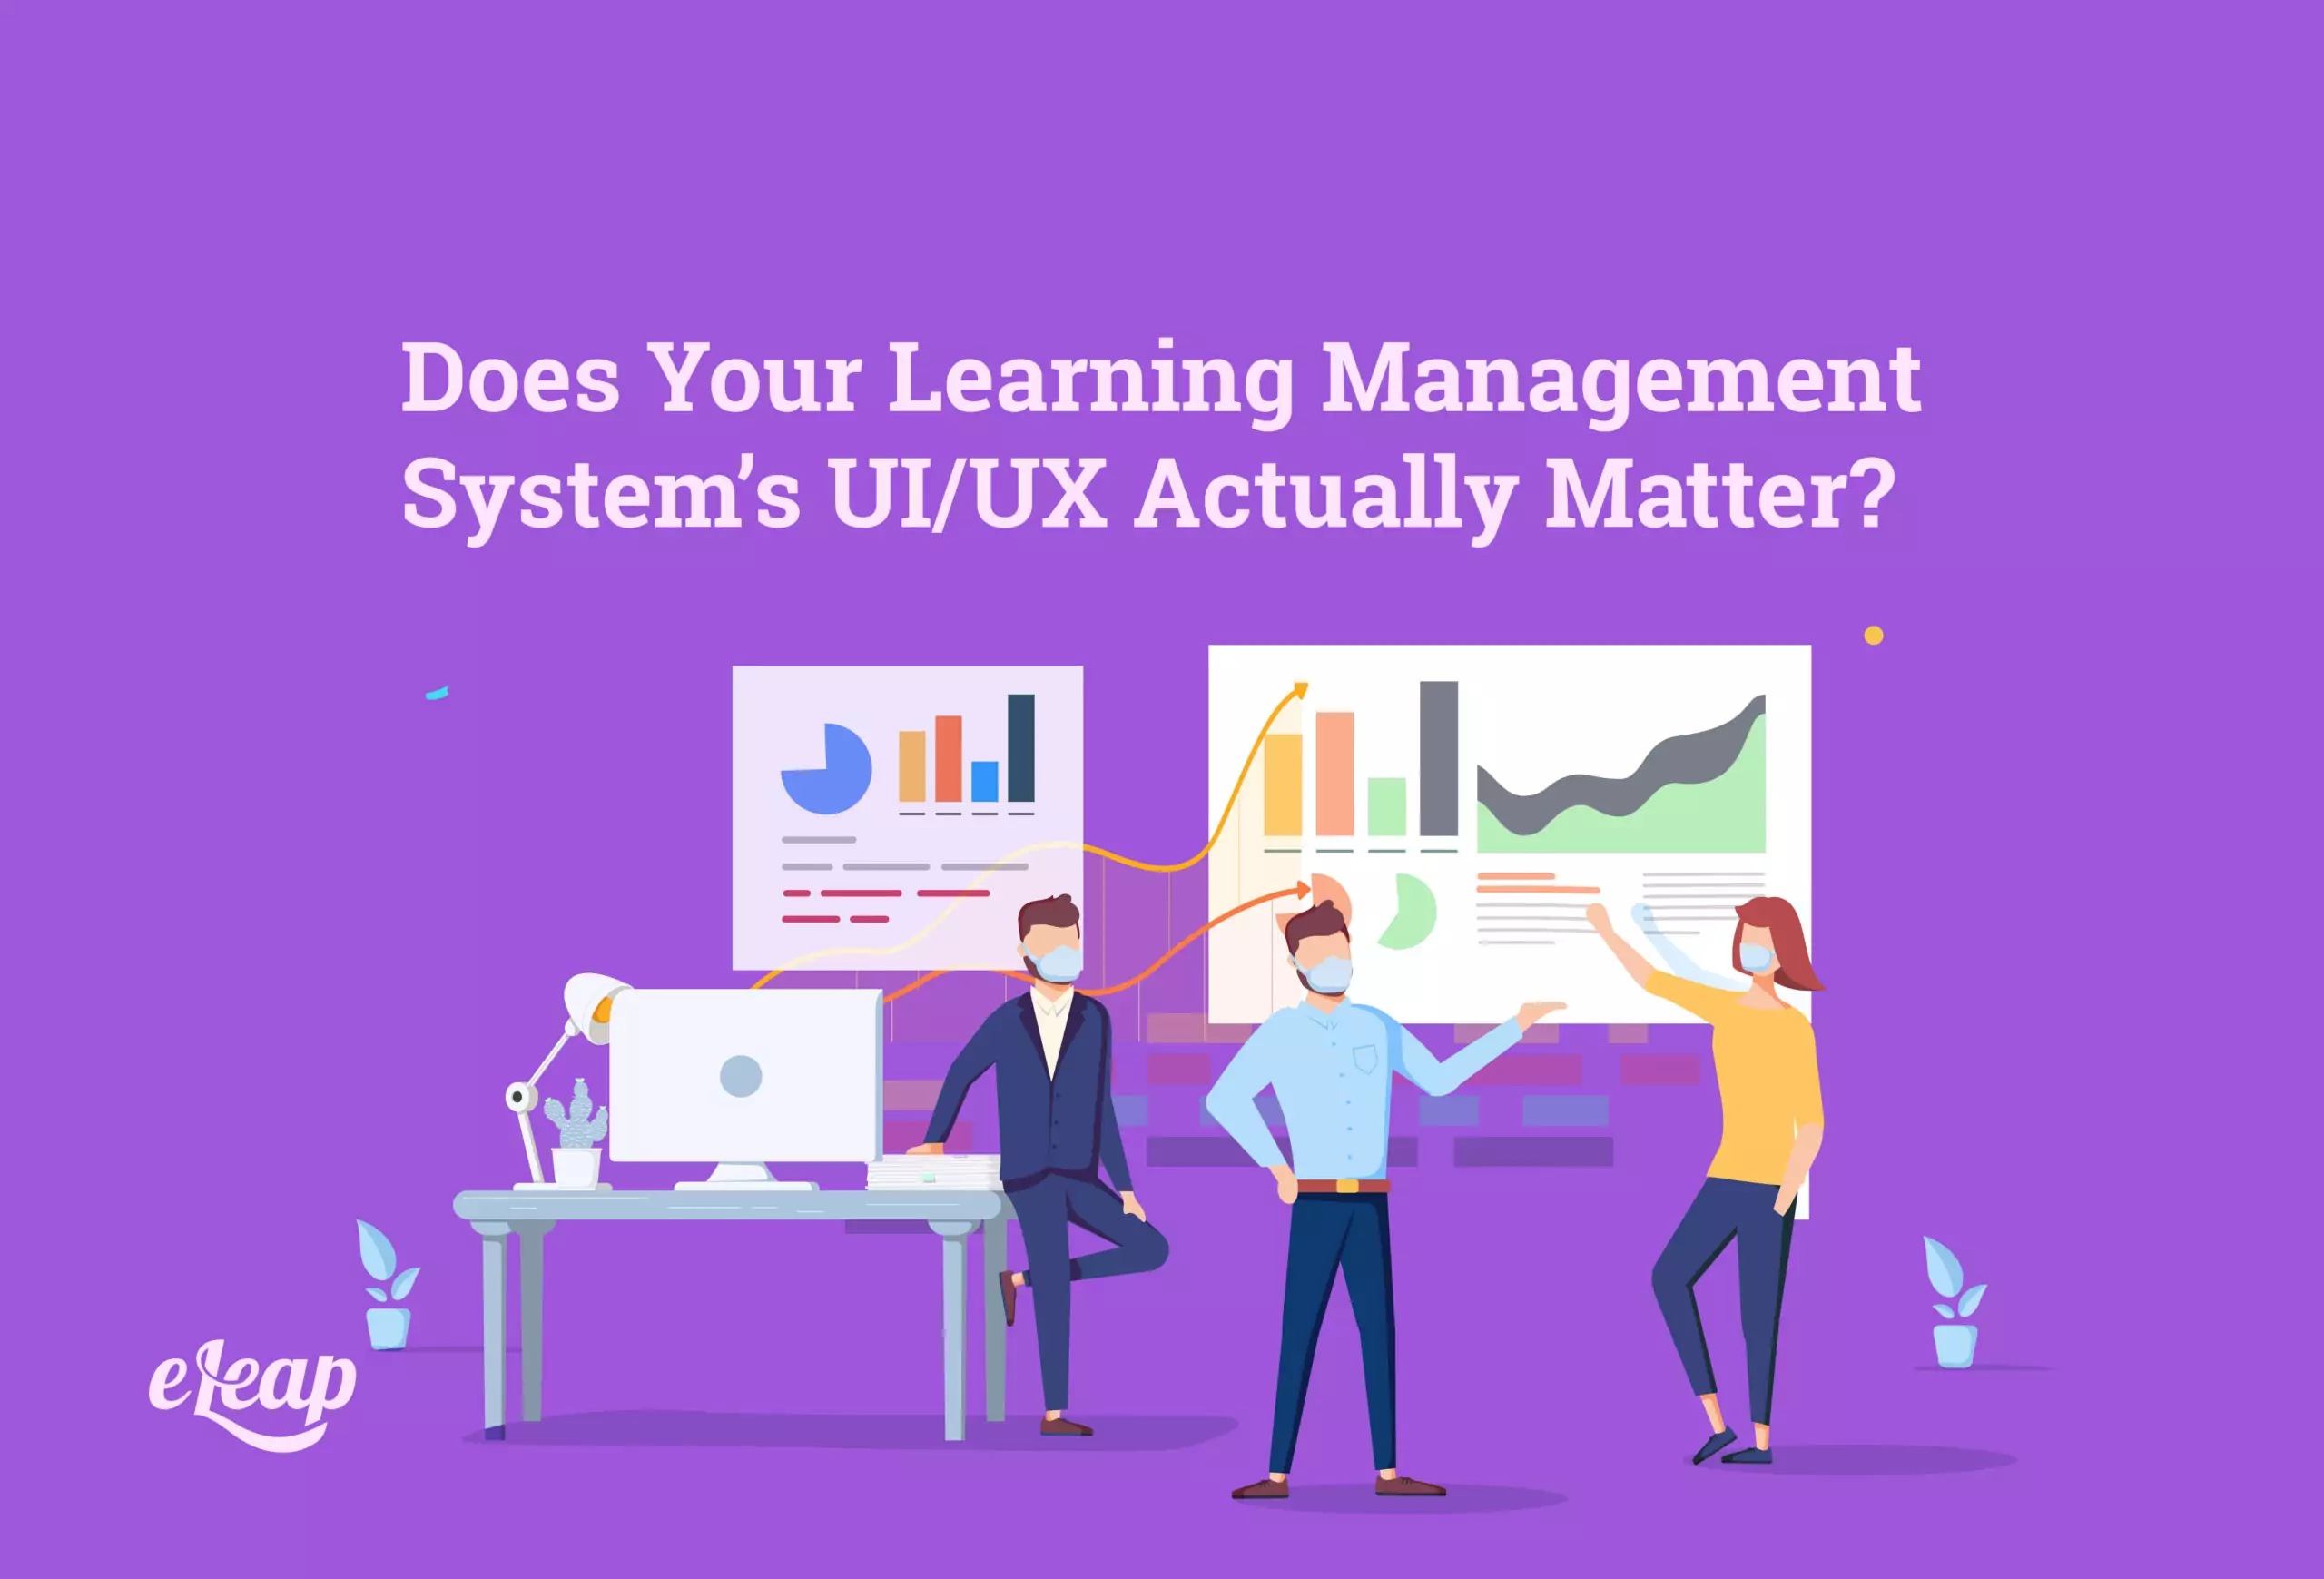 Does Your Learning Management System’s UI/UX Actually Matter?